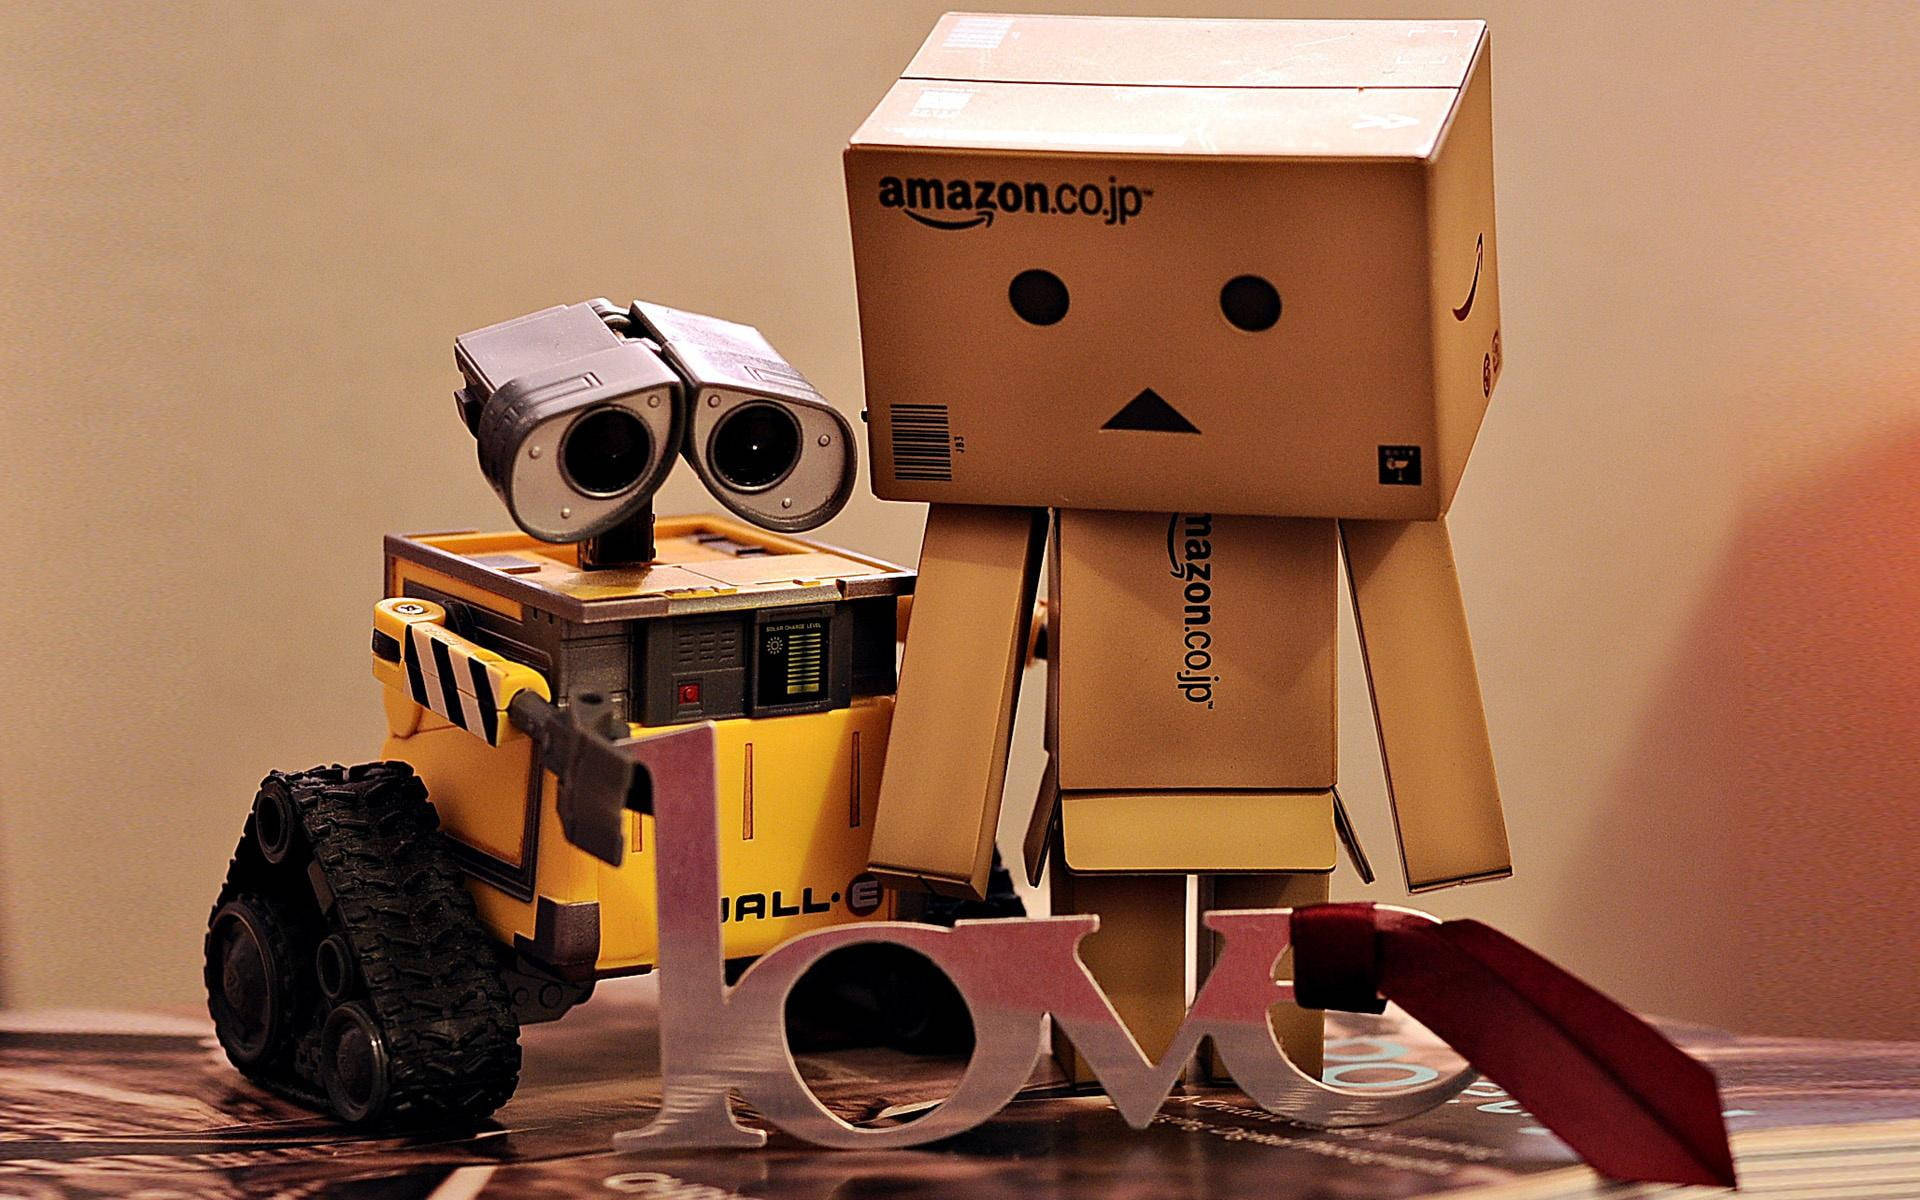 Paper Toy Wall E